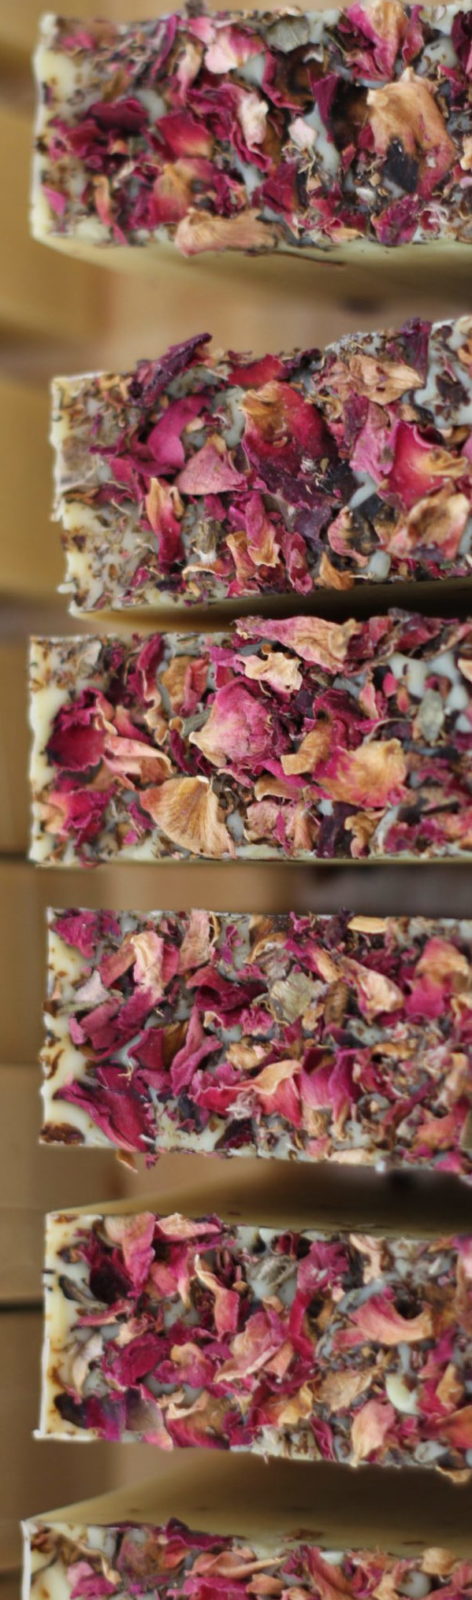 How You Can Use Rose Petals To Regulate Your Heart Rate